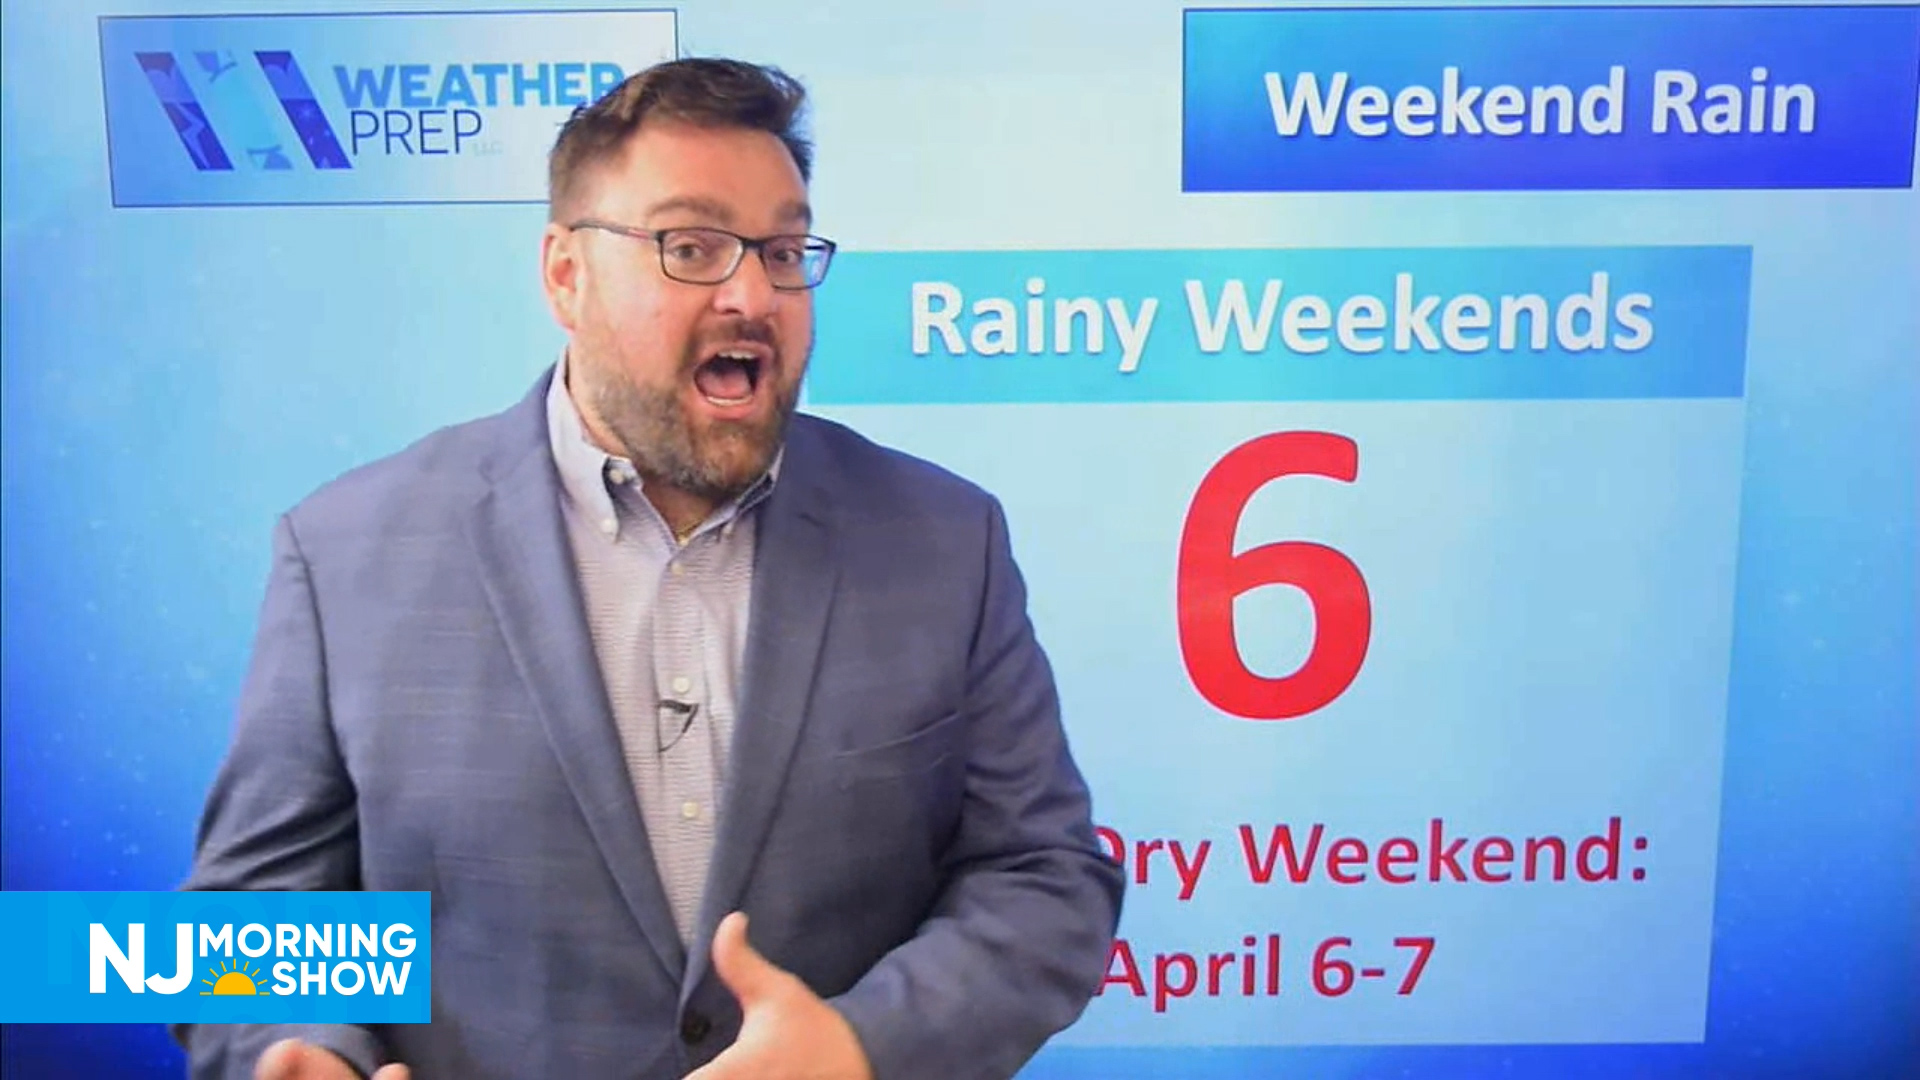 NJ Morning Show – Six consecutive Wet Weekends